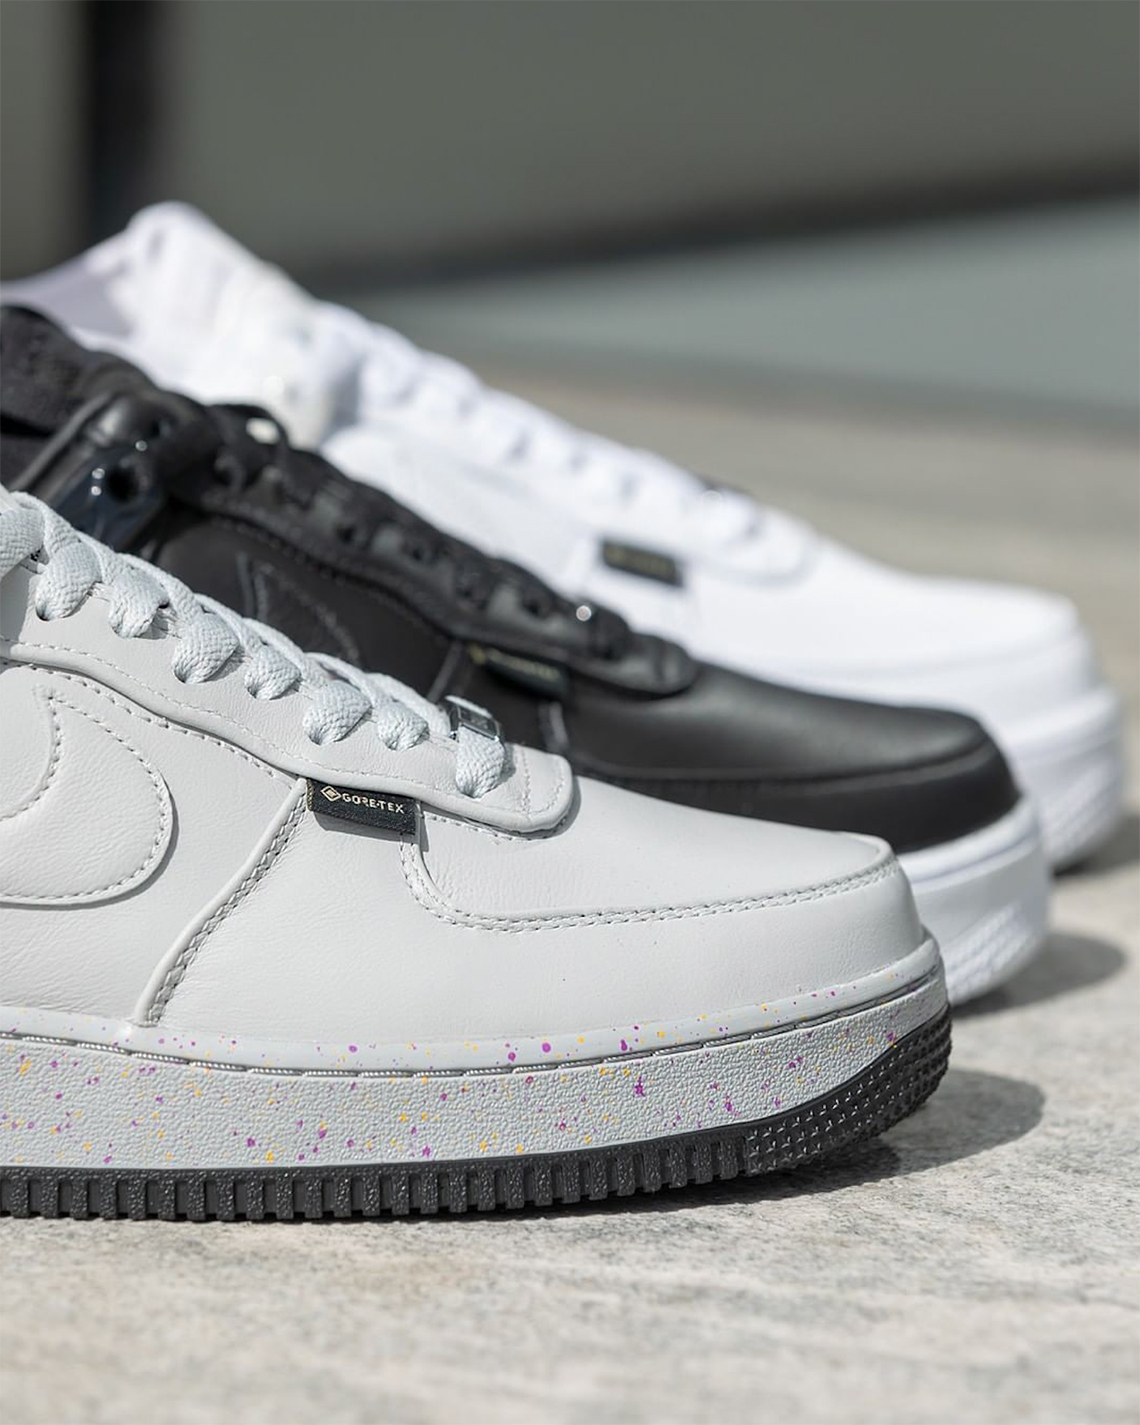 UNDERCOVER Nike Air Force 1 Gore-Tex Store List | SneakerNews.com